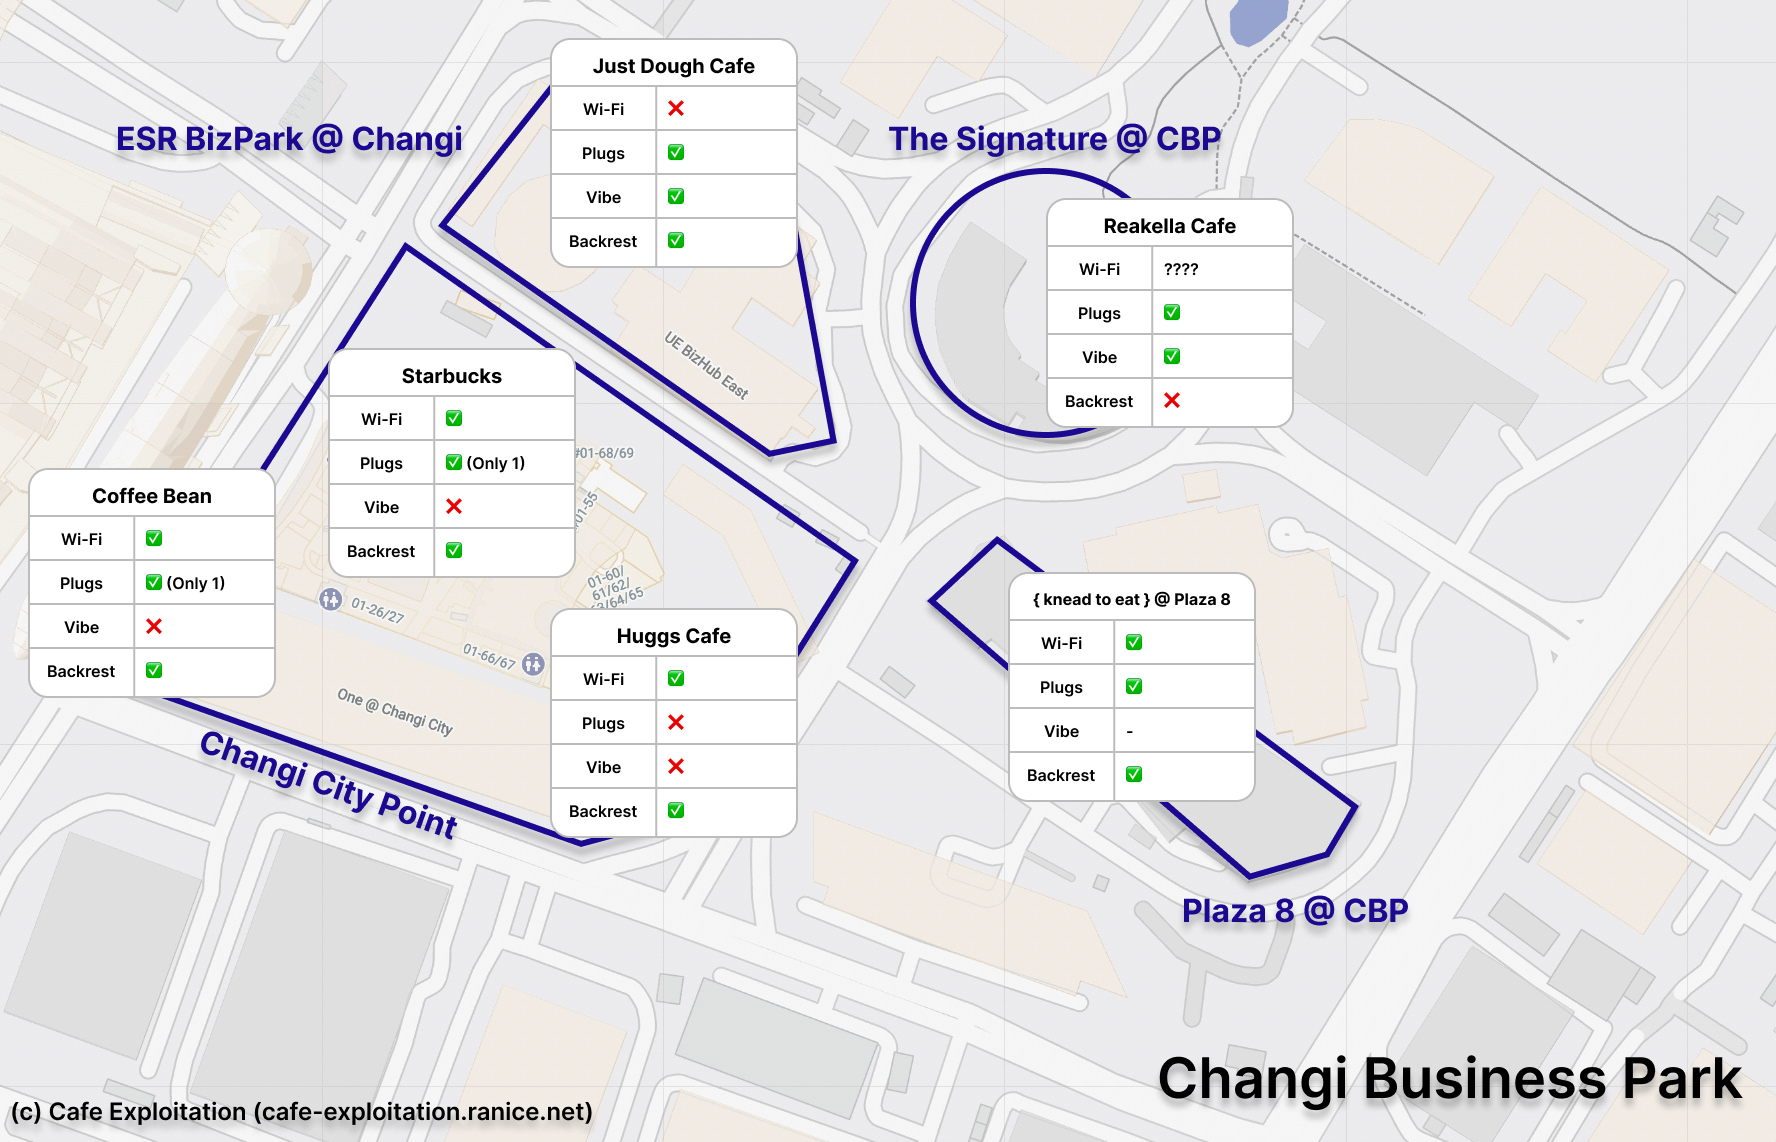 Map of changi business park